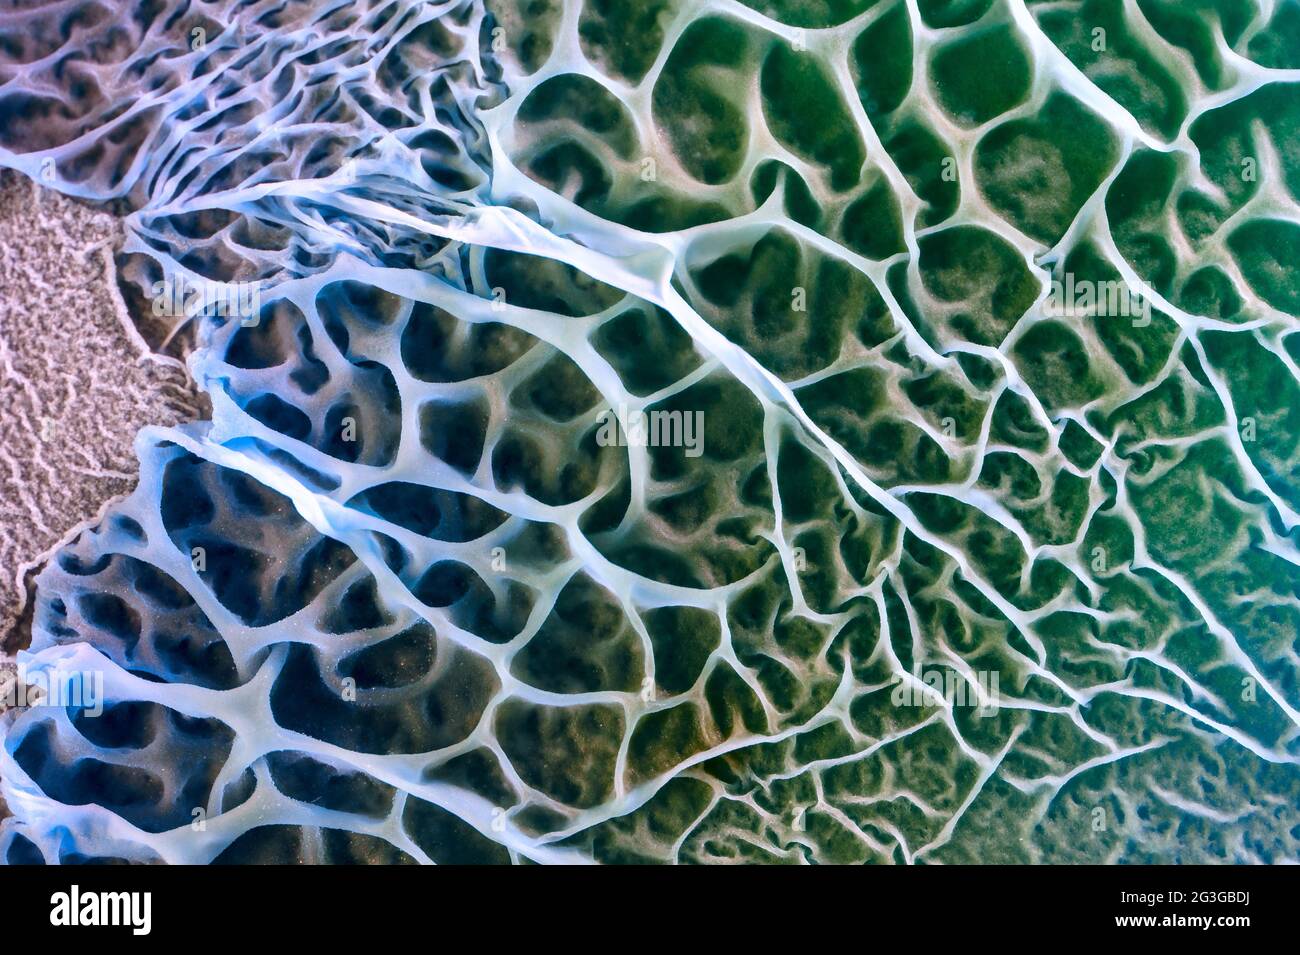 Fungal growth on biological material microscopic image Stock Photo